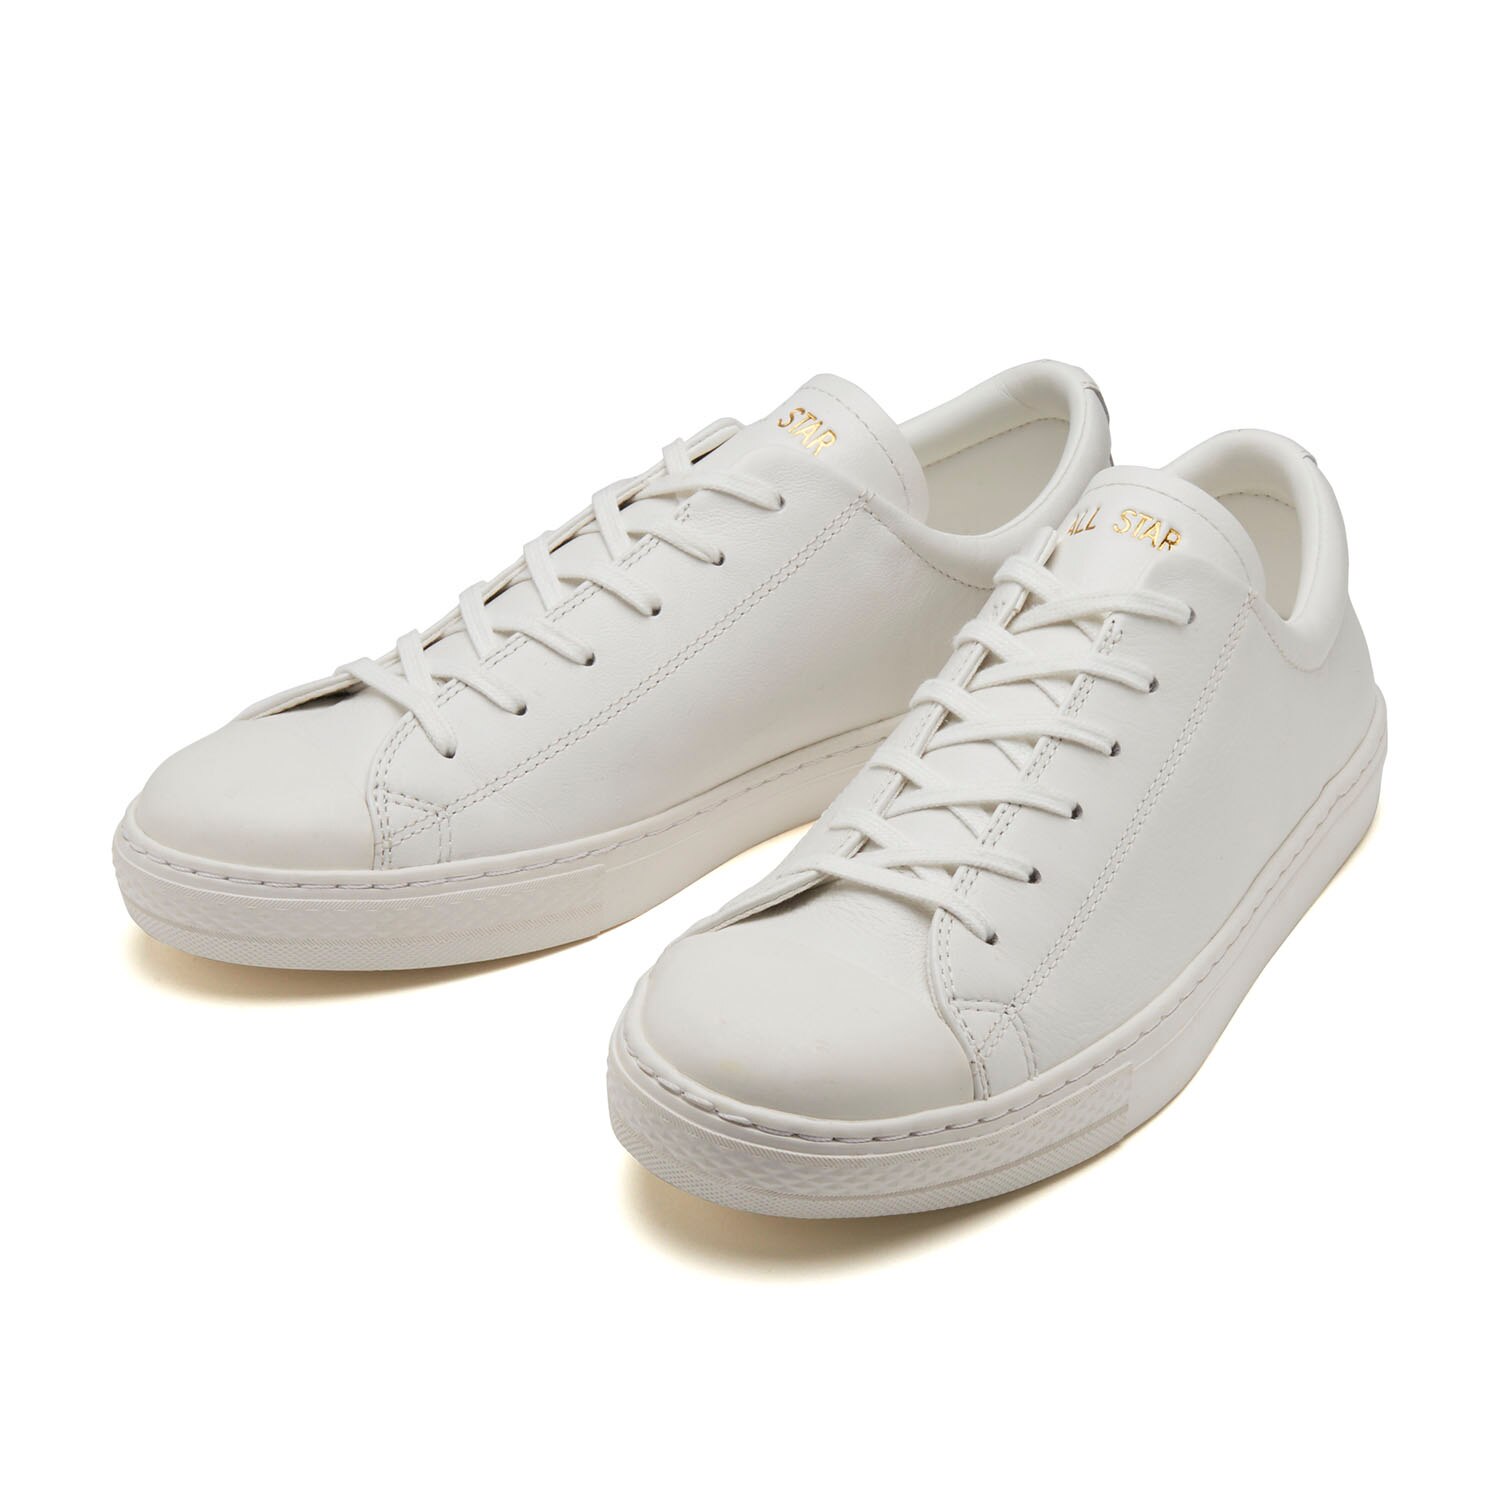 CONVERSE】LEATHER AS COUPE OX|ABC-MART(エービーシー・マート)の通販 ...